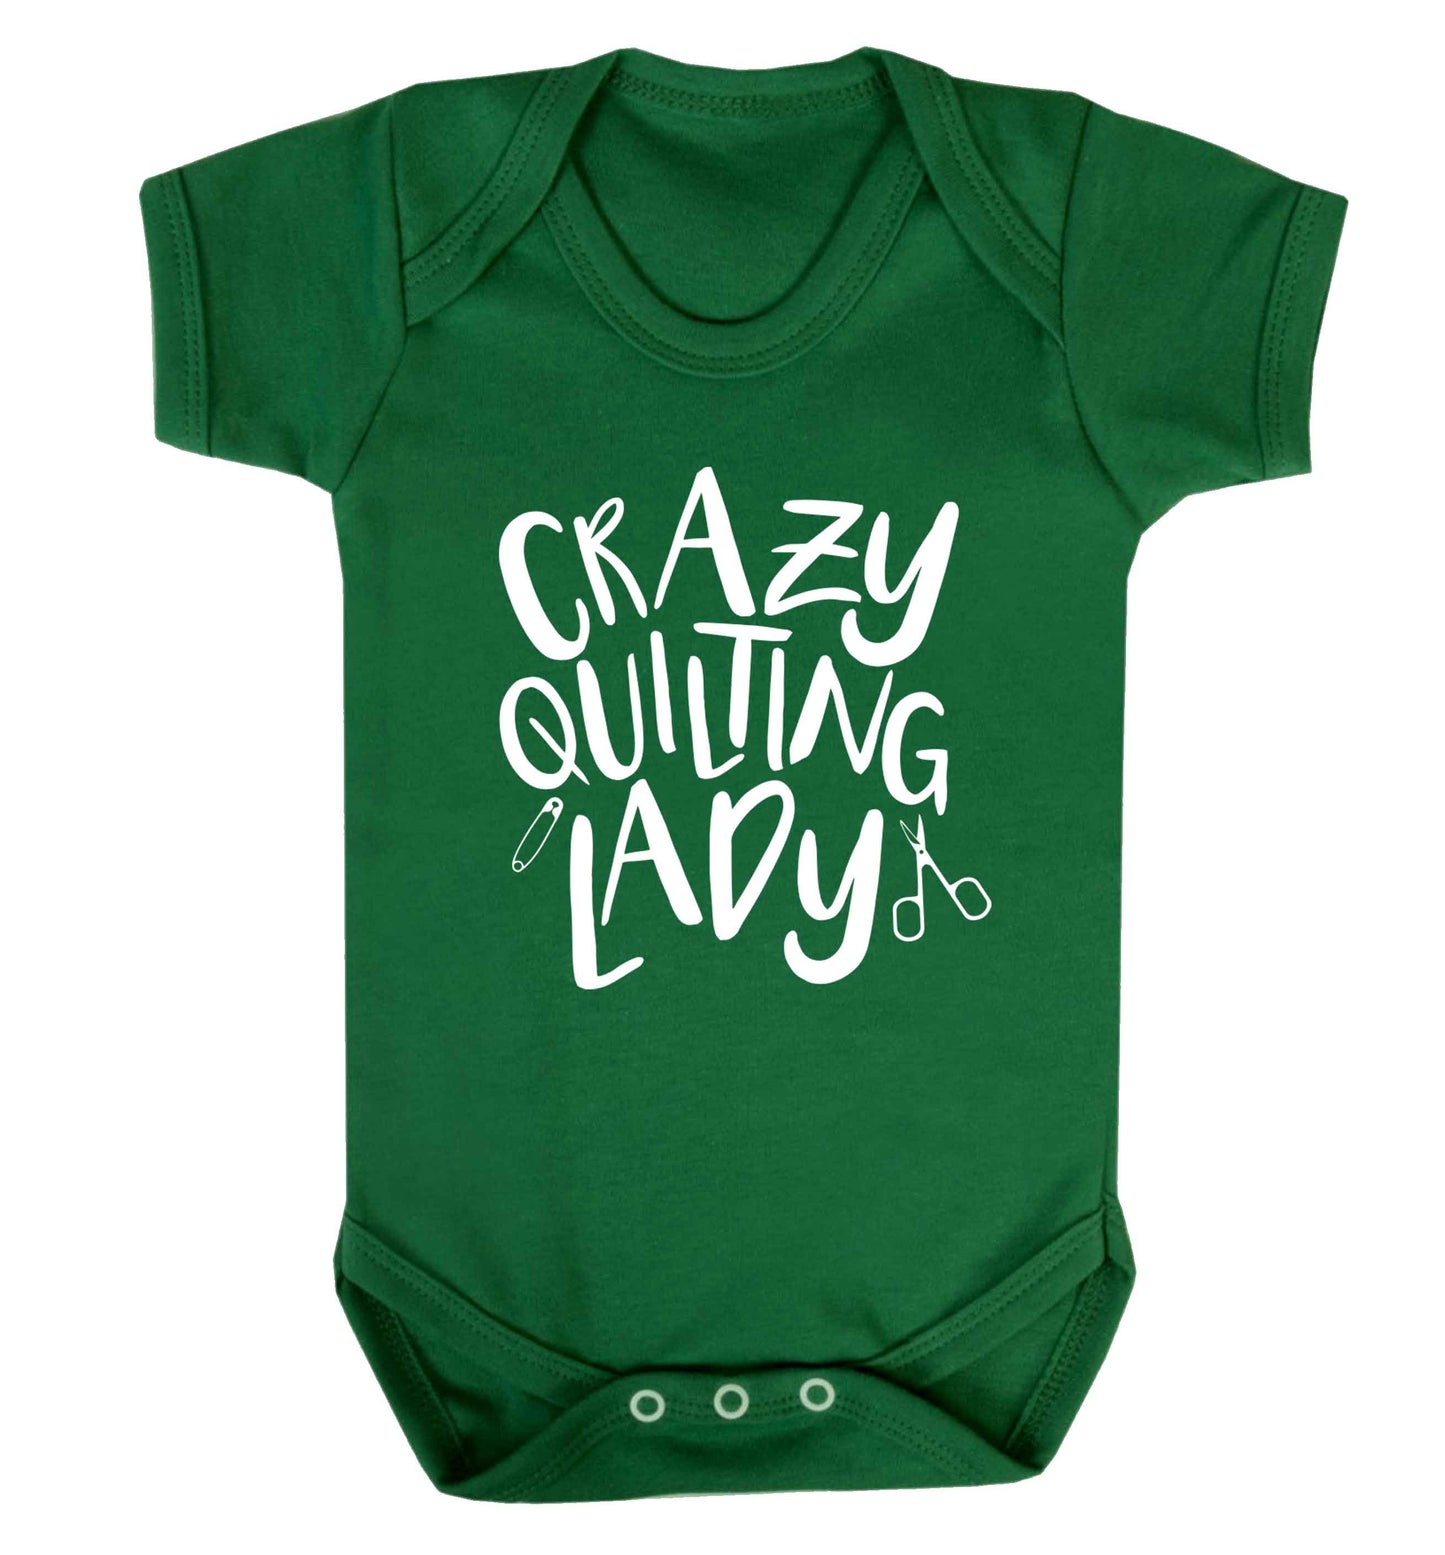 Crazy quilting lady Baby Vest green 18-24 months